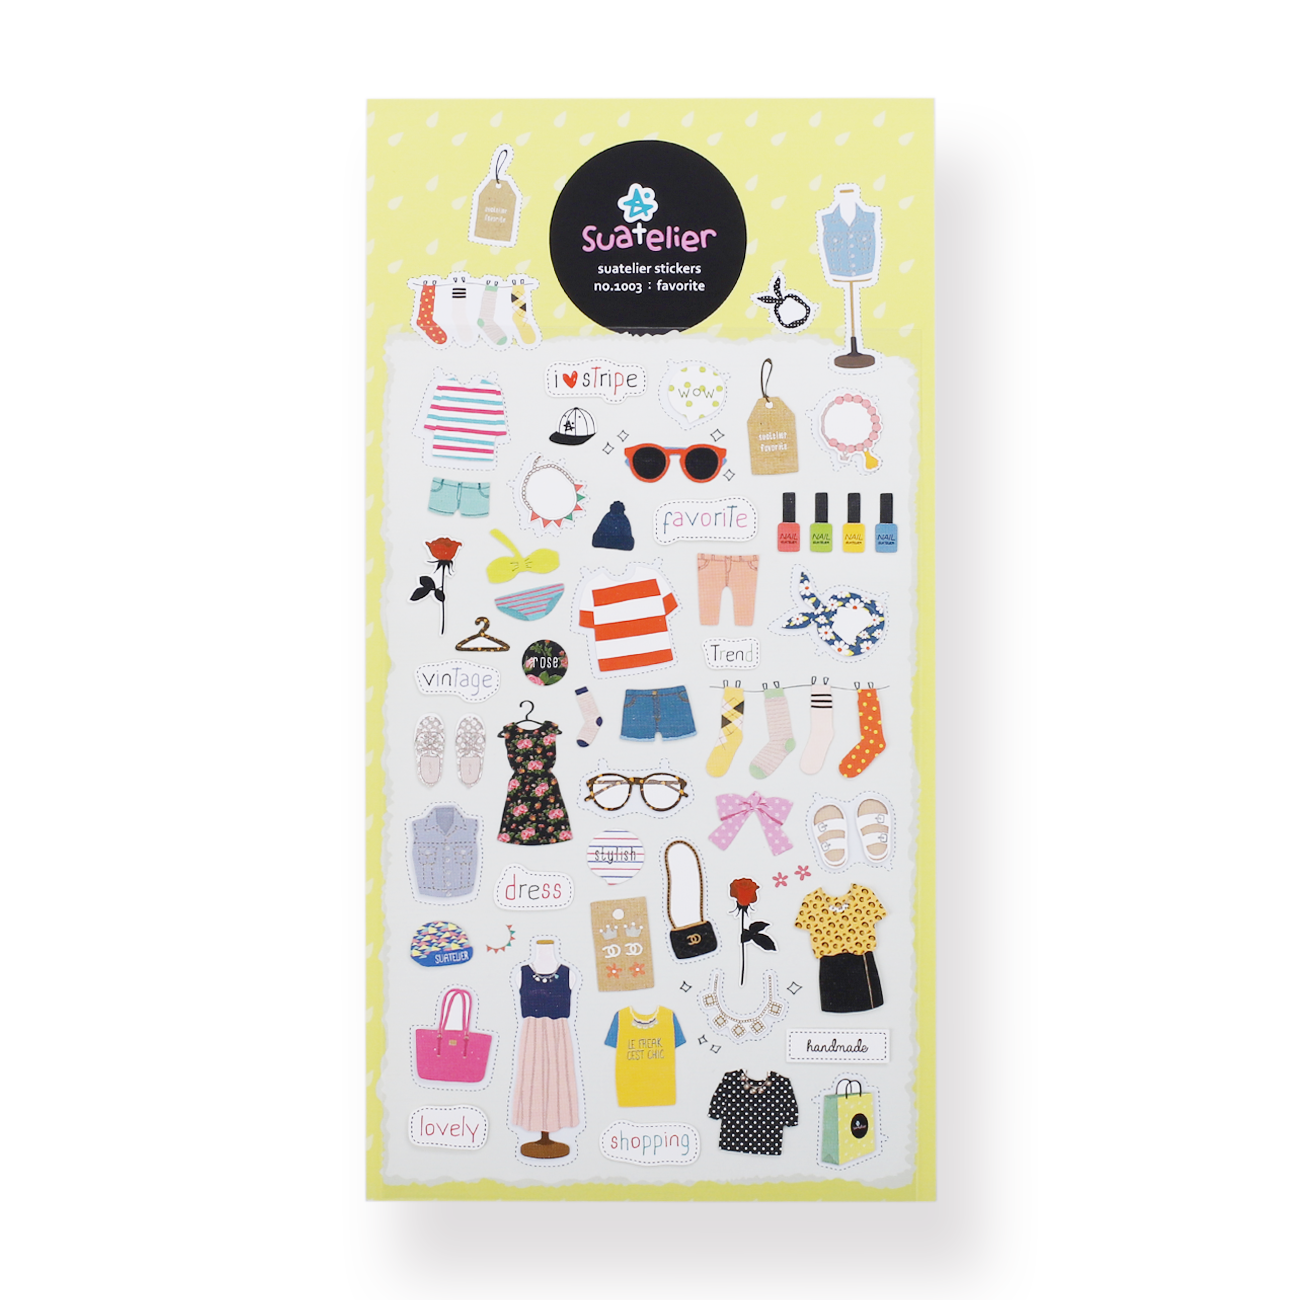 Suatelier Favorite Stickers - Stationery Pal